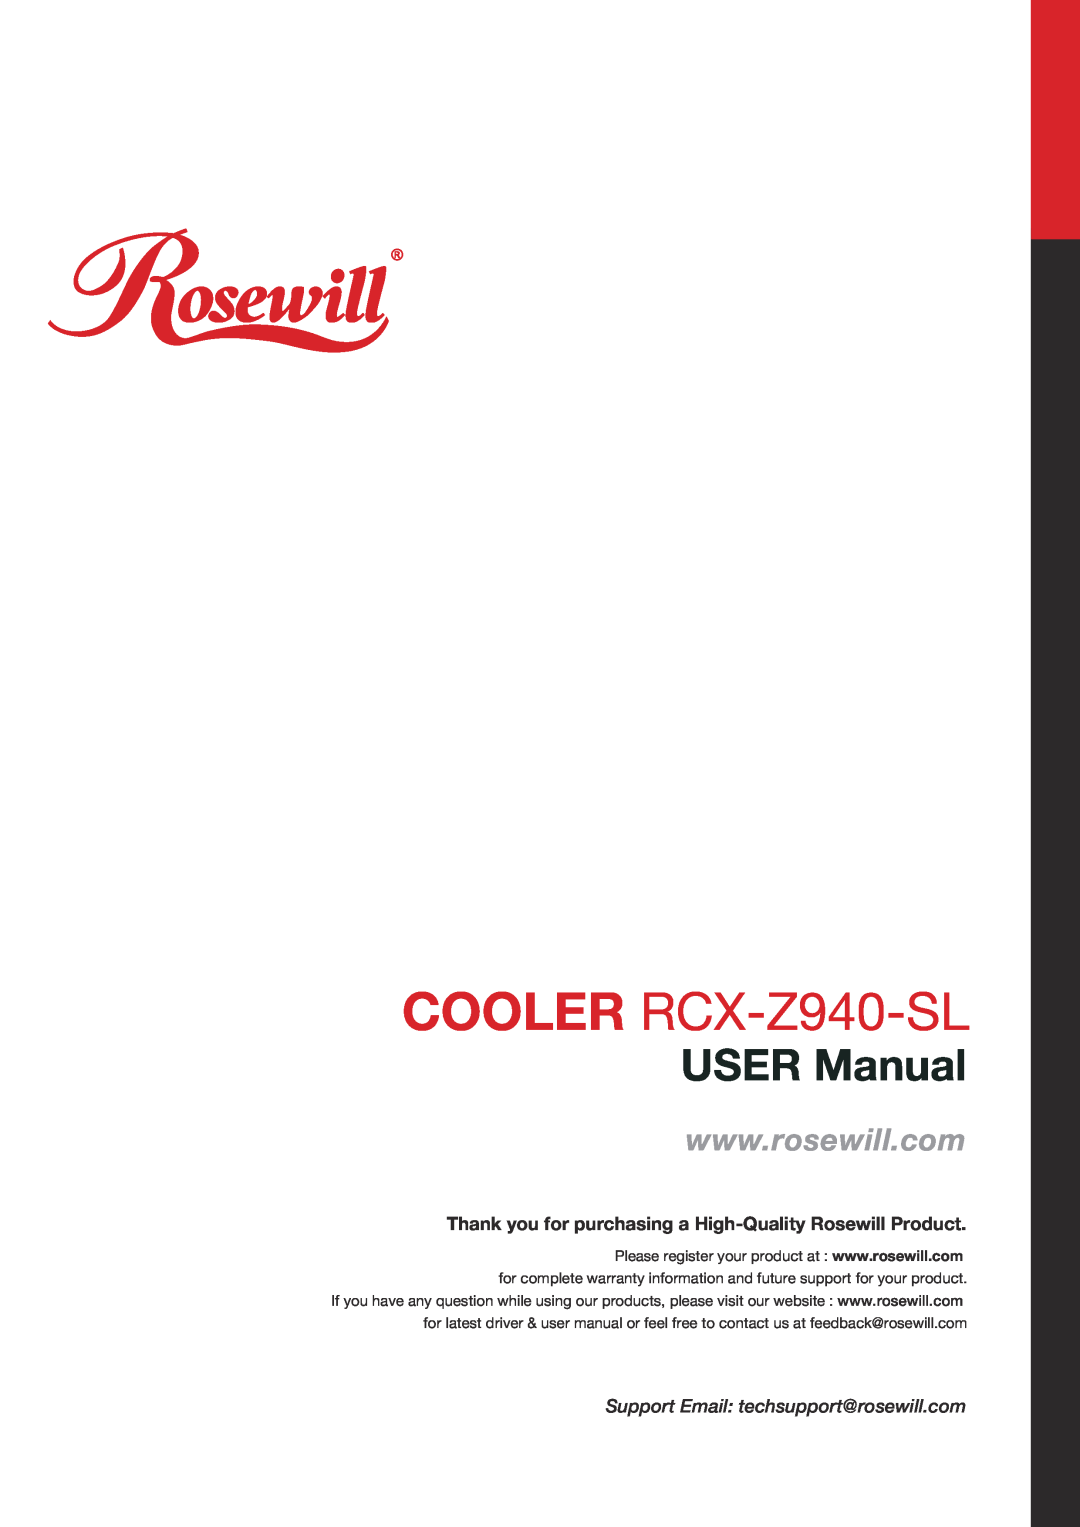 Rosewill user manual COOLER RCX-Z940-SL, USER Manual, Thank you for purchasing a High-Quality Rosewill Product 